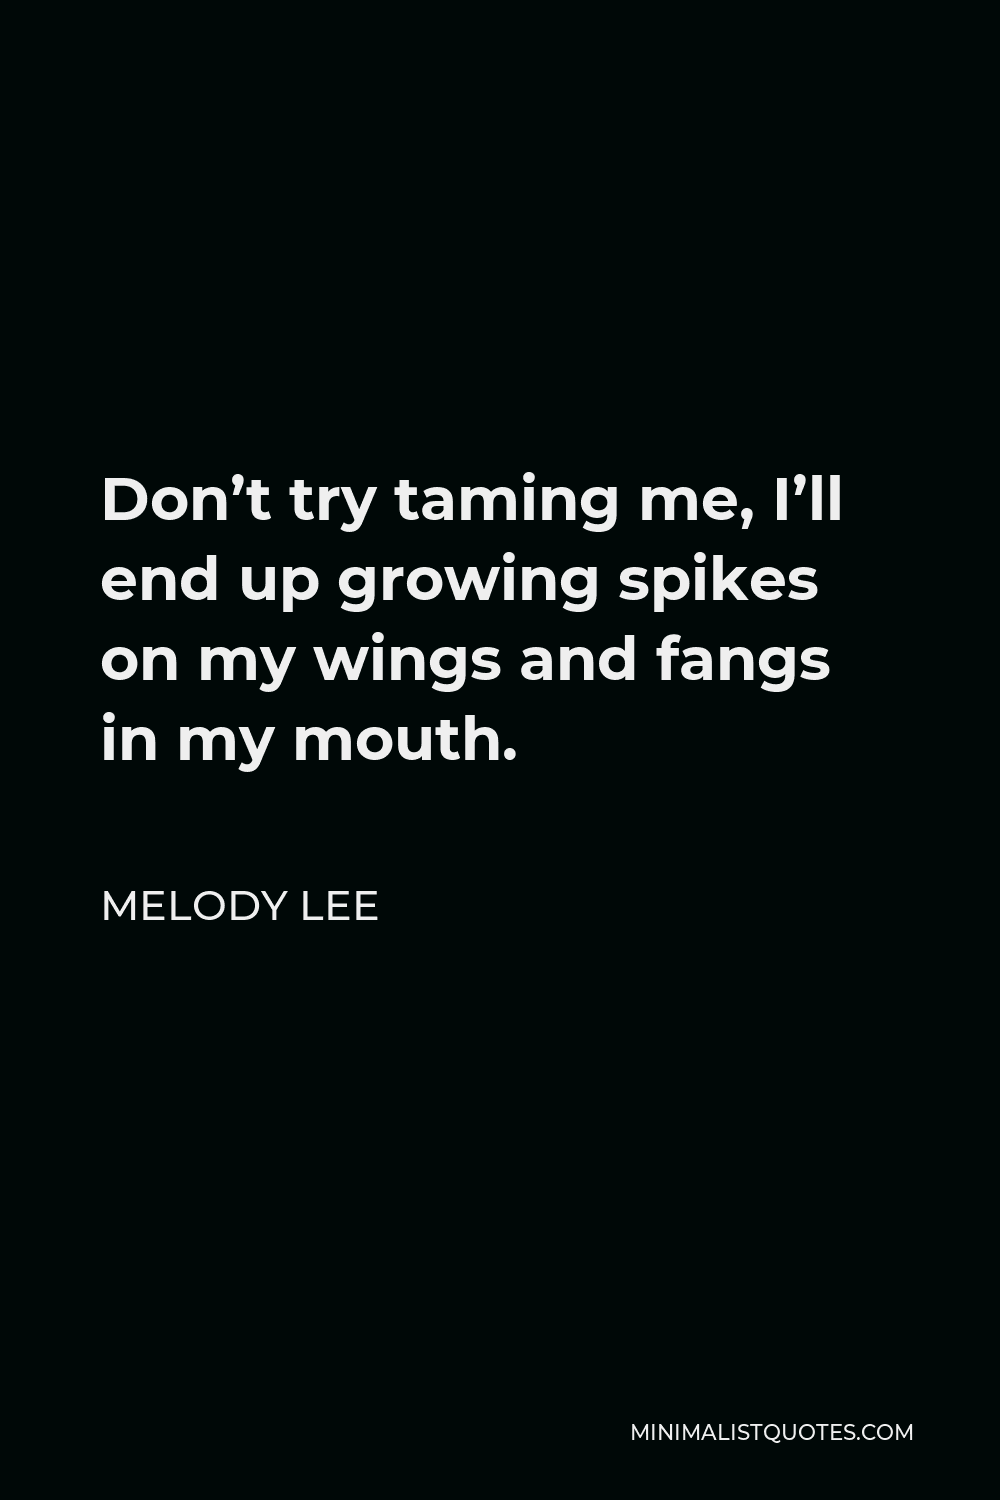 Melody Lee Quote - Don’t try taming me, I’ll end up growing spikes on my wings and fangs in my mouth.